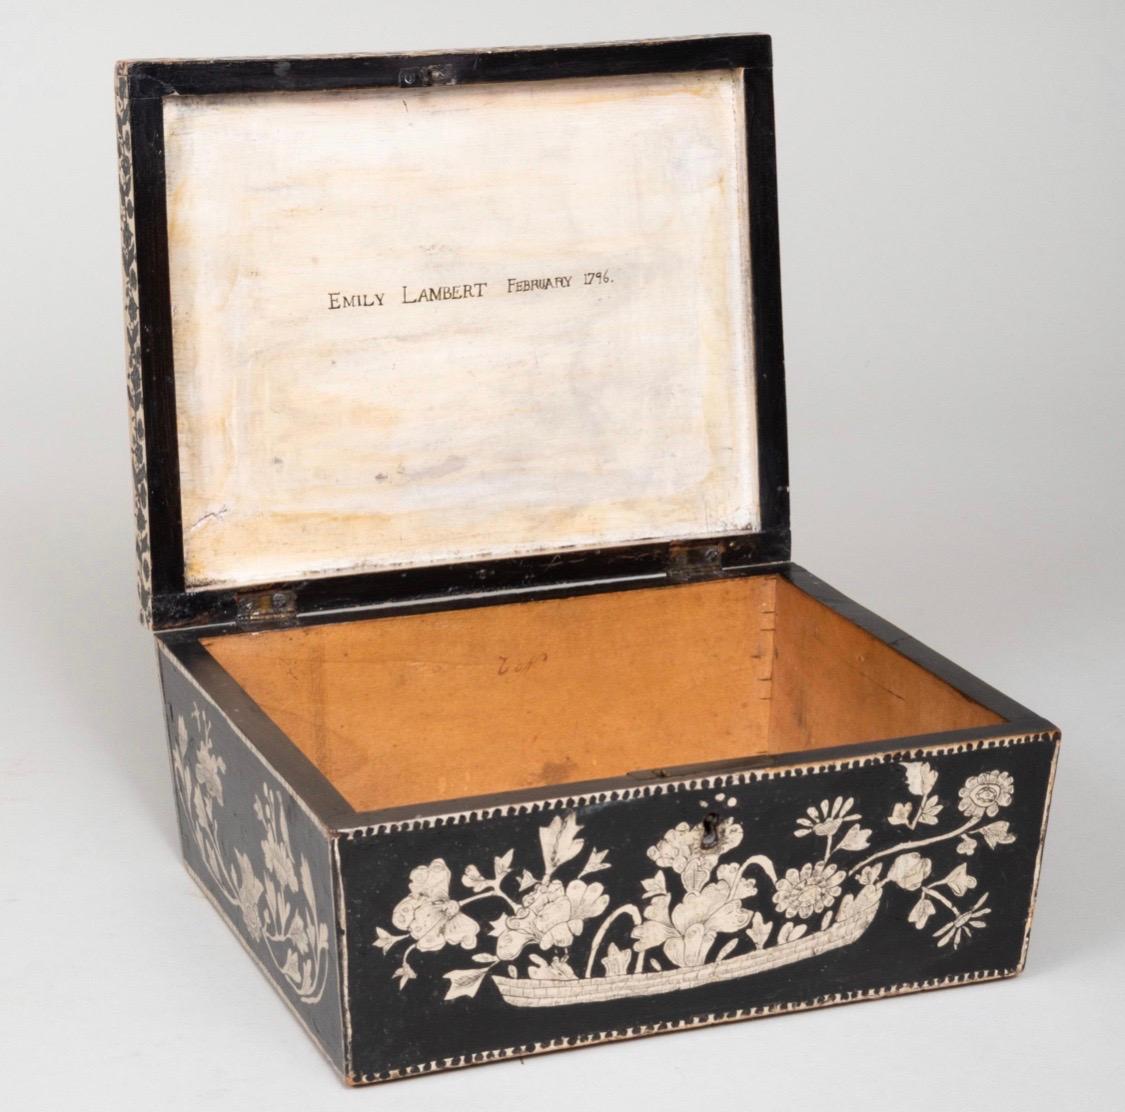 English penwork box
Wooden box handpainted in a handsome black with white floral design and decoration.
The interior of the cover signed and dated 'Emily Lambert February 1796'. This box is the period of Jane Austen. One can imagine Emily Lambert